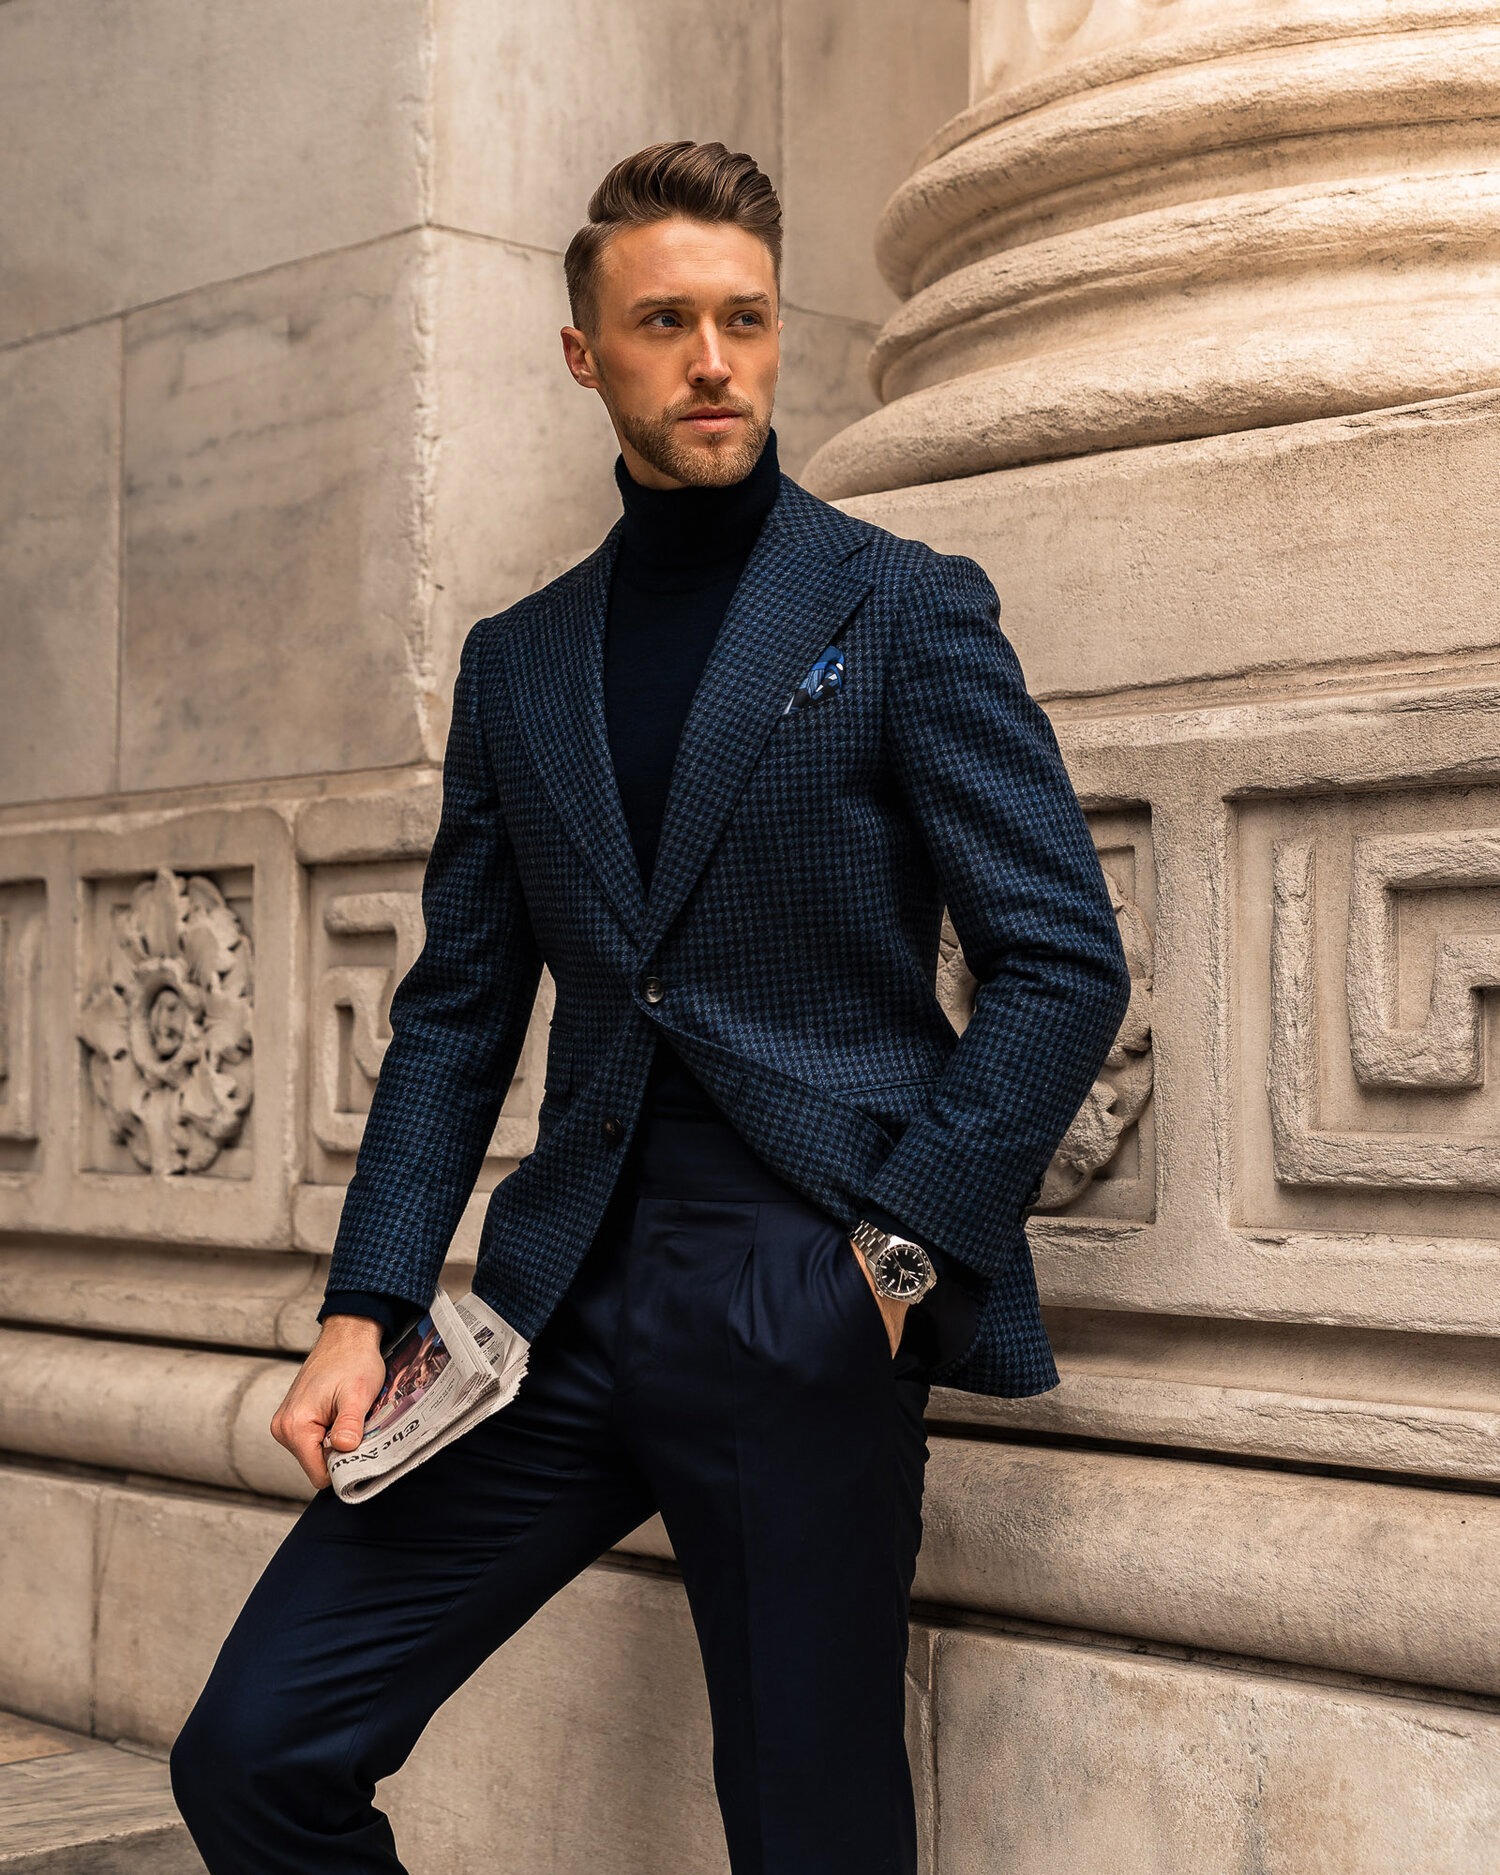 Turtleneck with Suit  How to Wear with a Black or Navy Suit